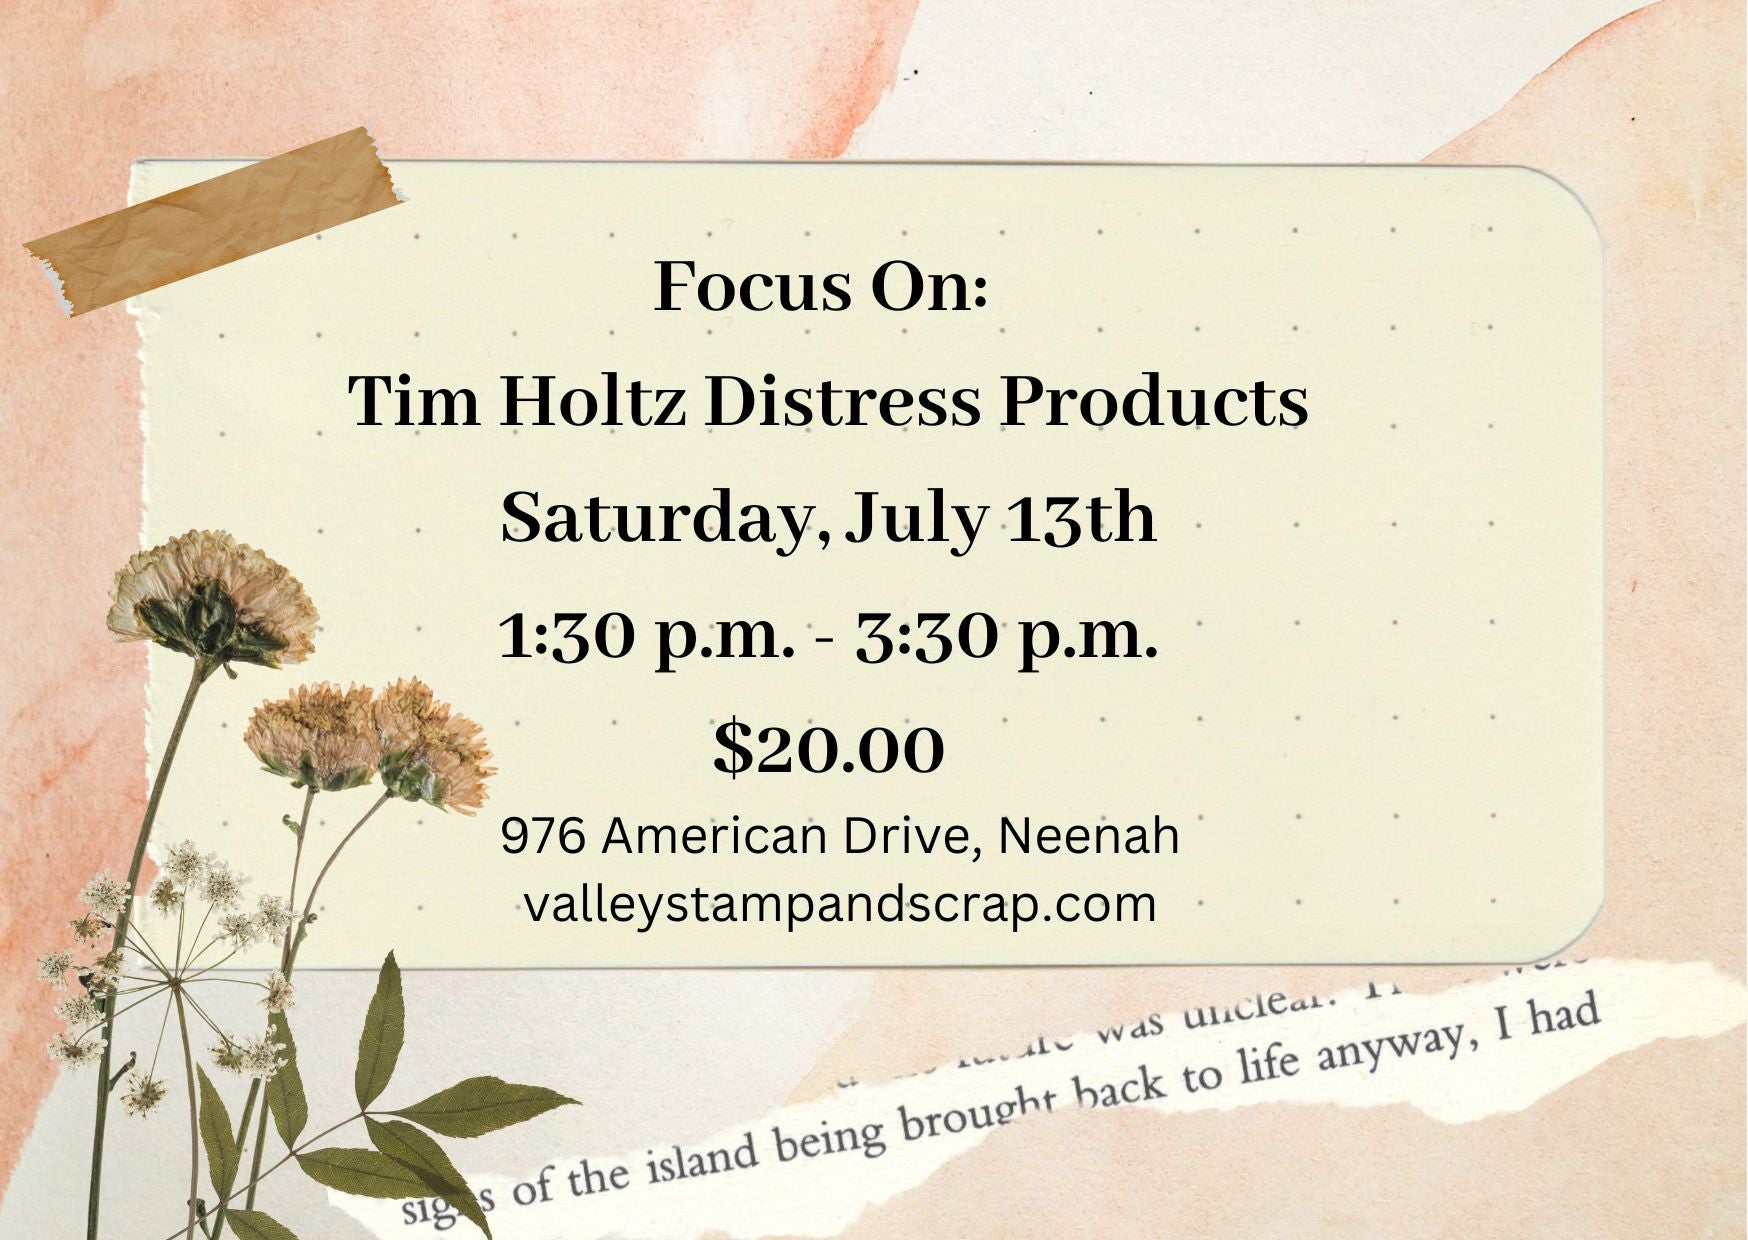 "Focus On: Tim Holtz Distress Products"